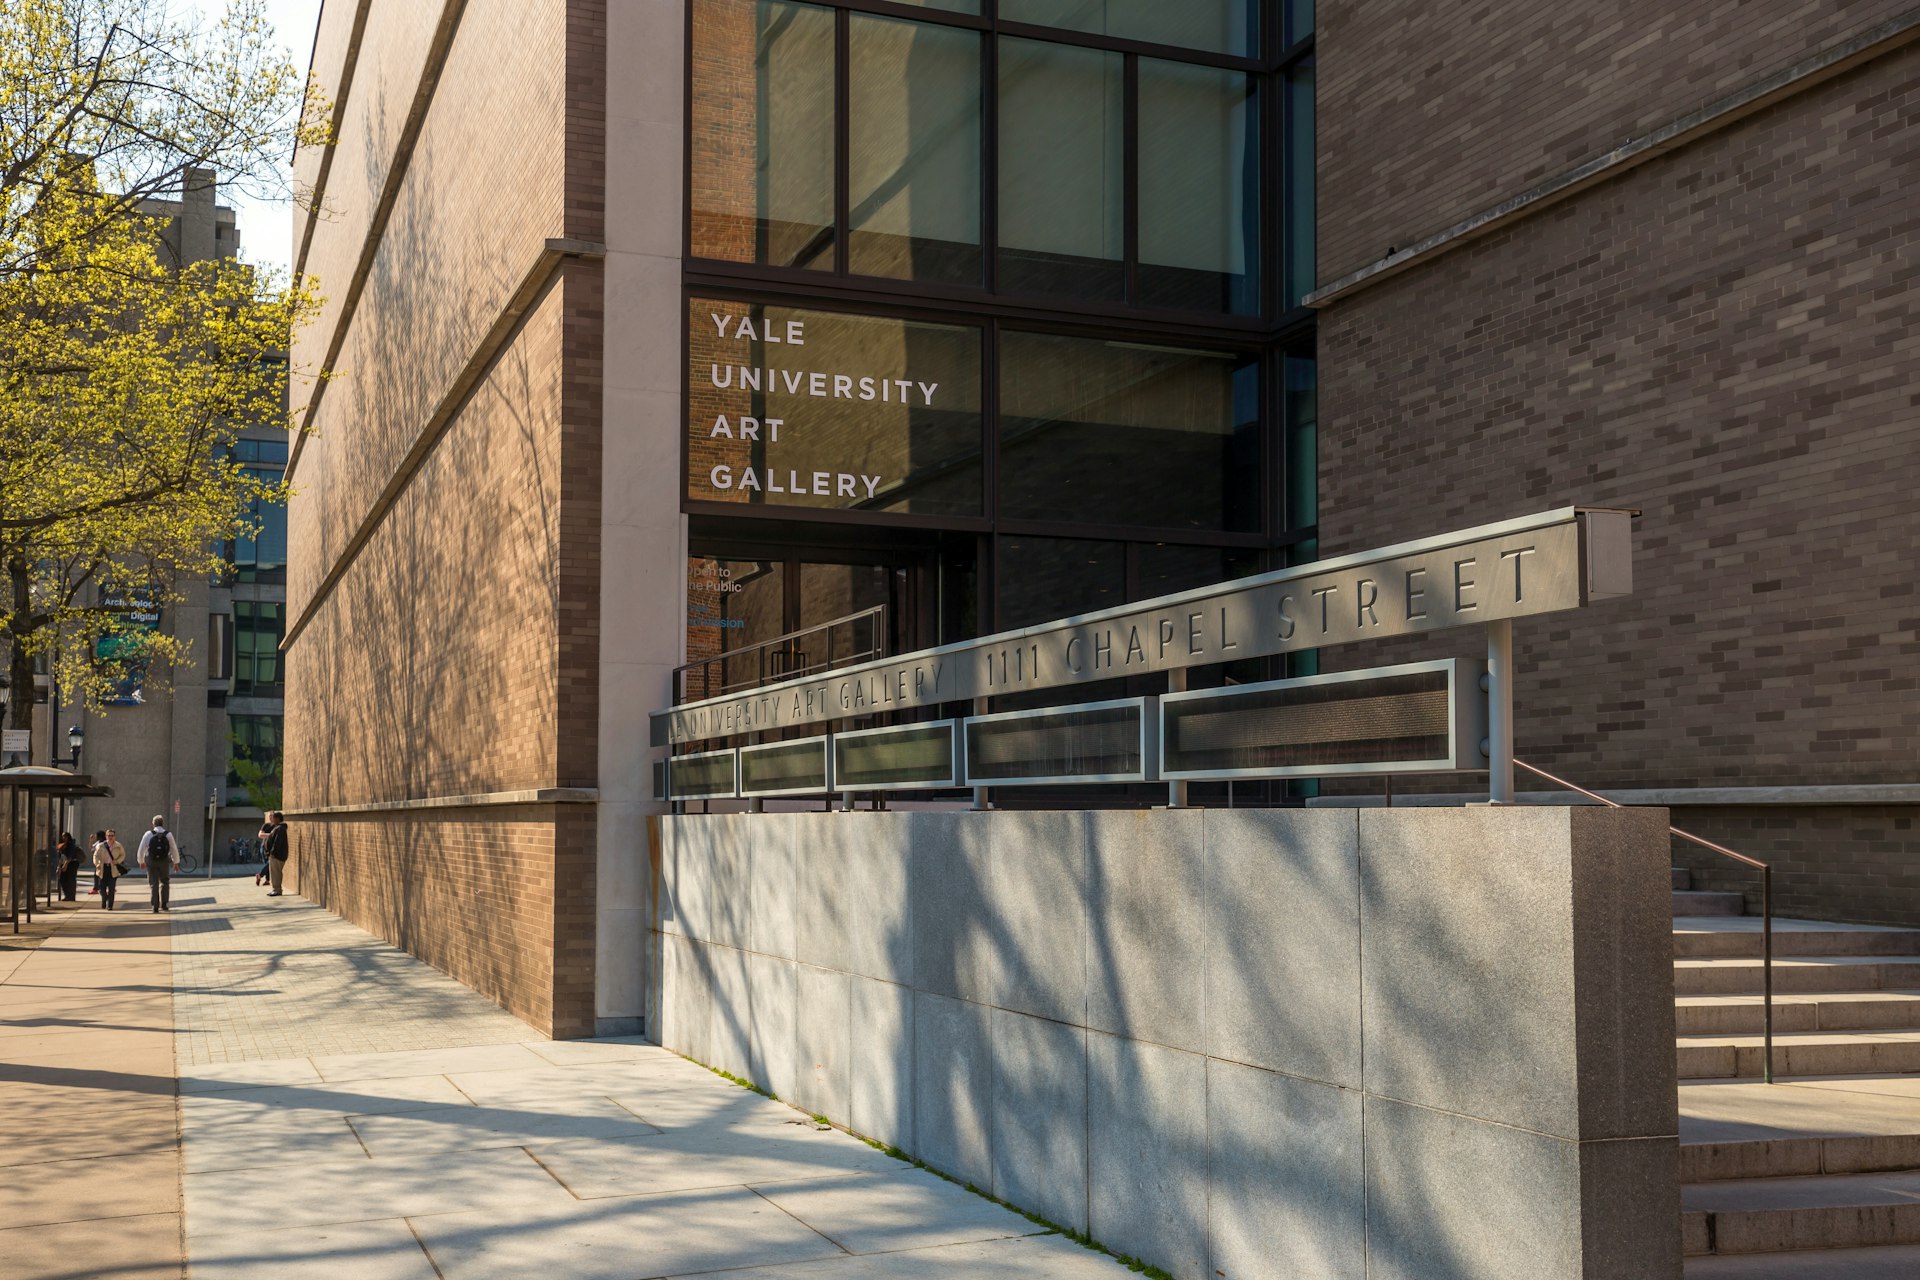 The entrance to Yale University Art Gallery, a sleek, modern-looking building with a sign showing the name of the gallery.